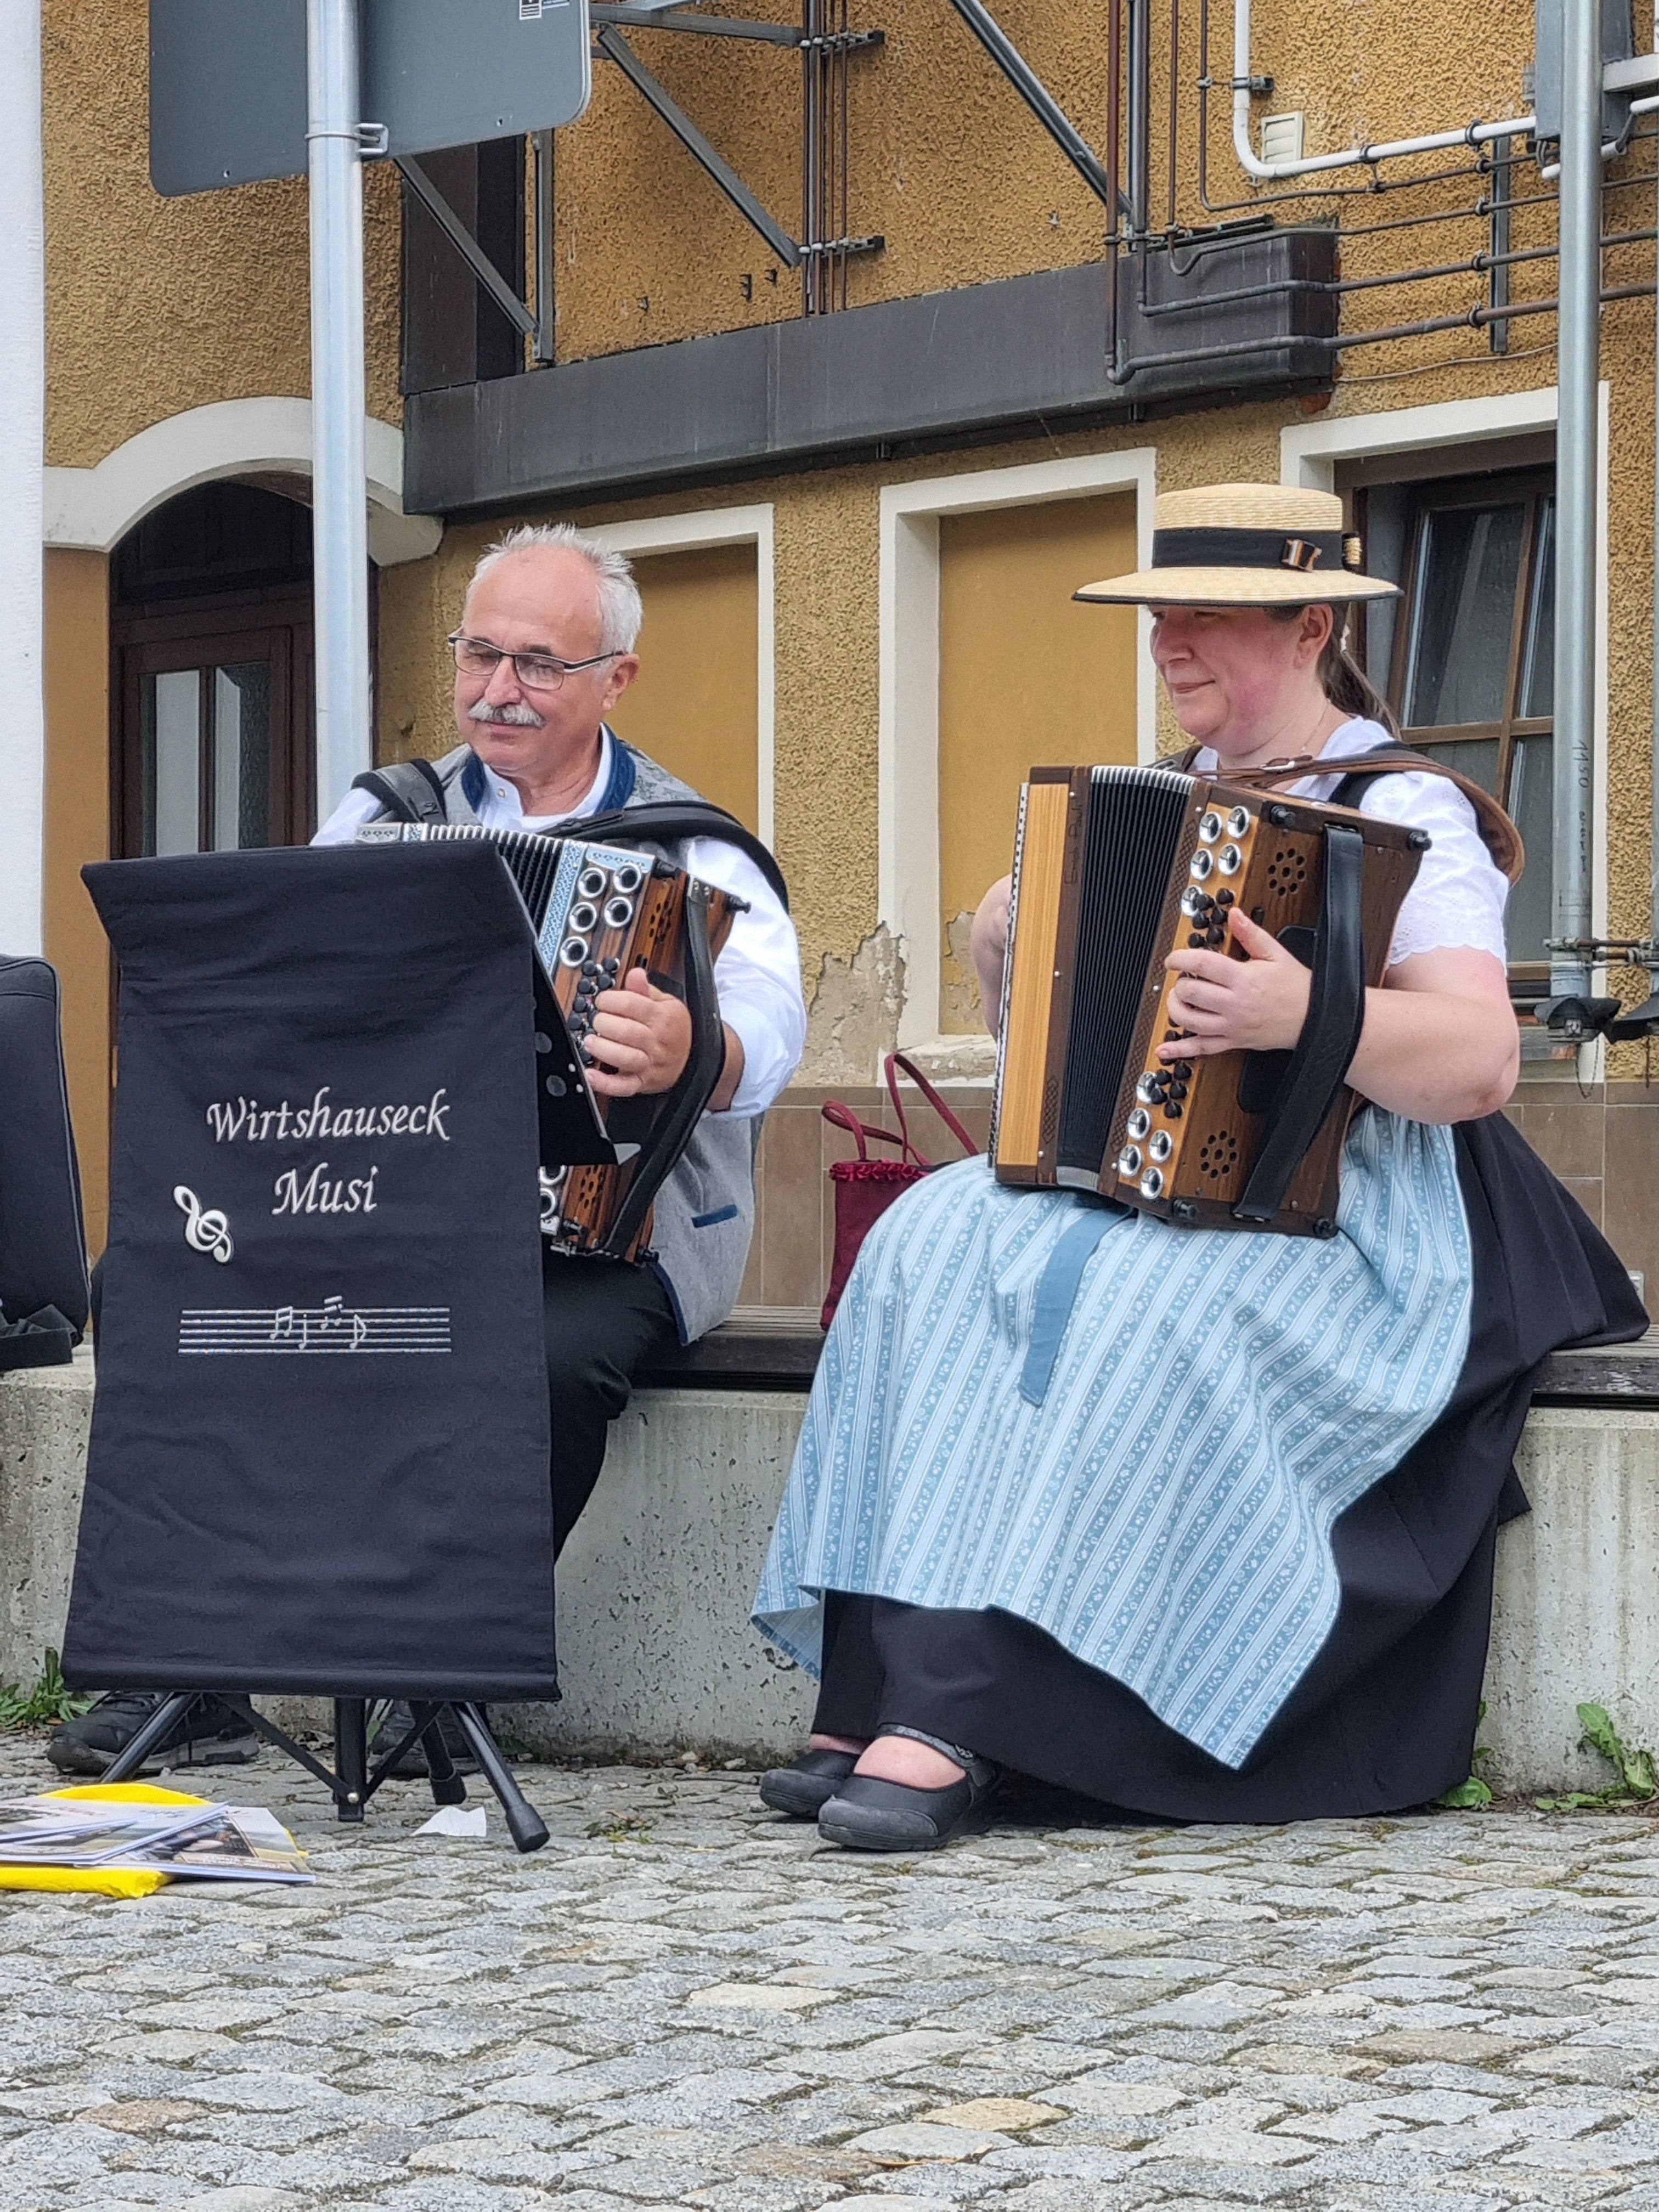 Musicians at the Drumherum Festival